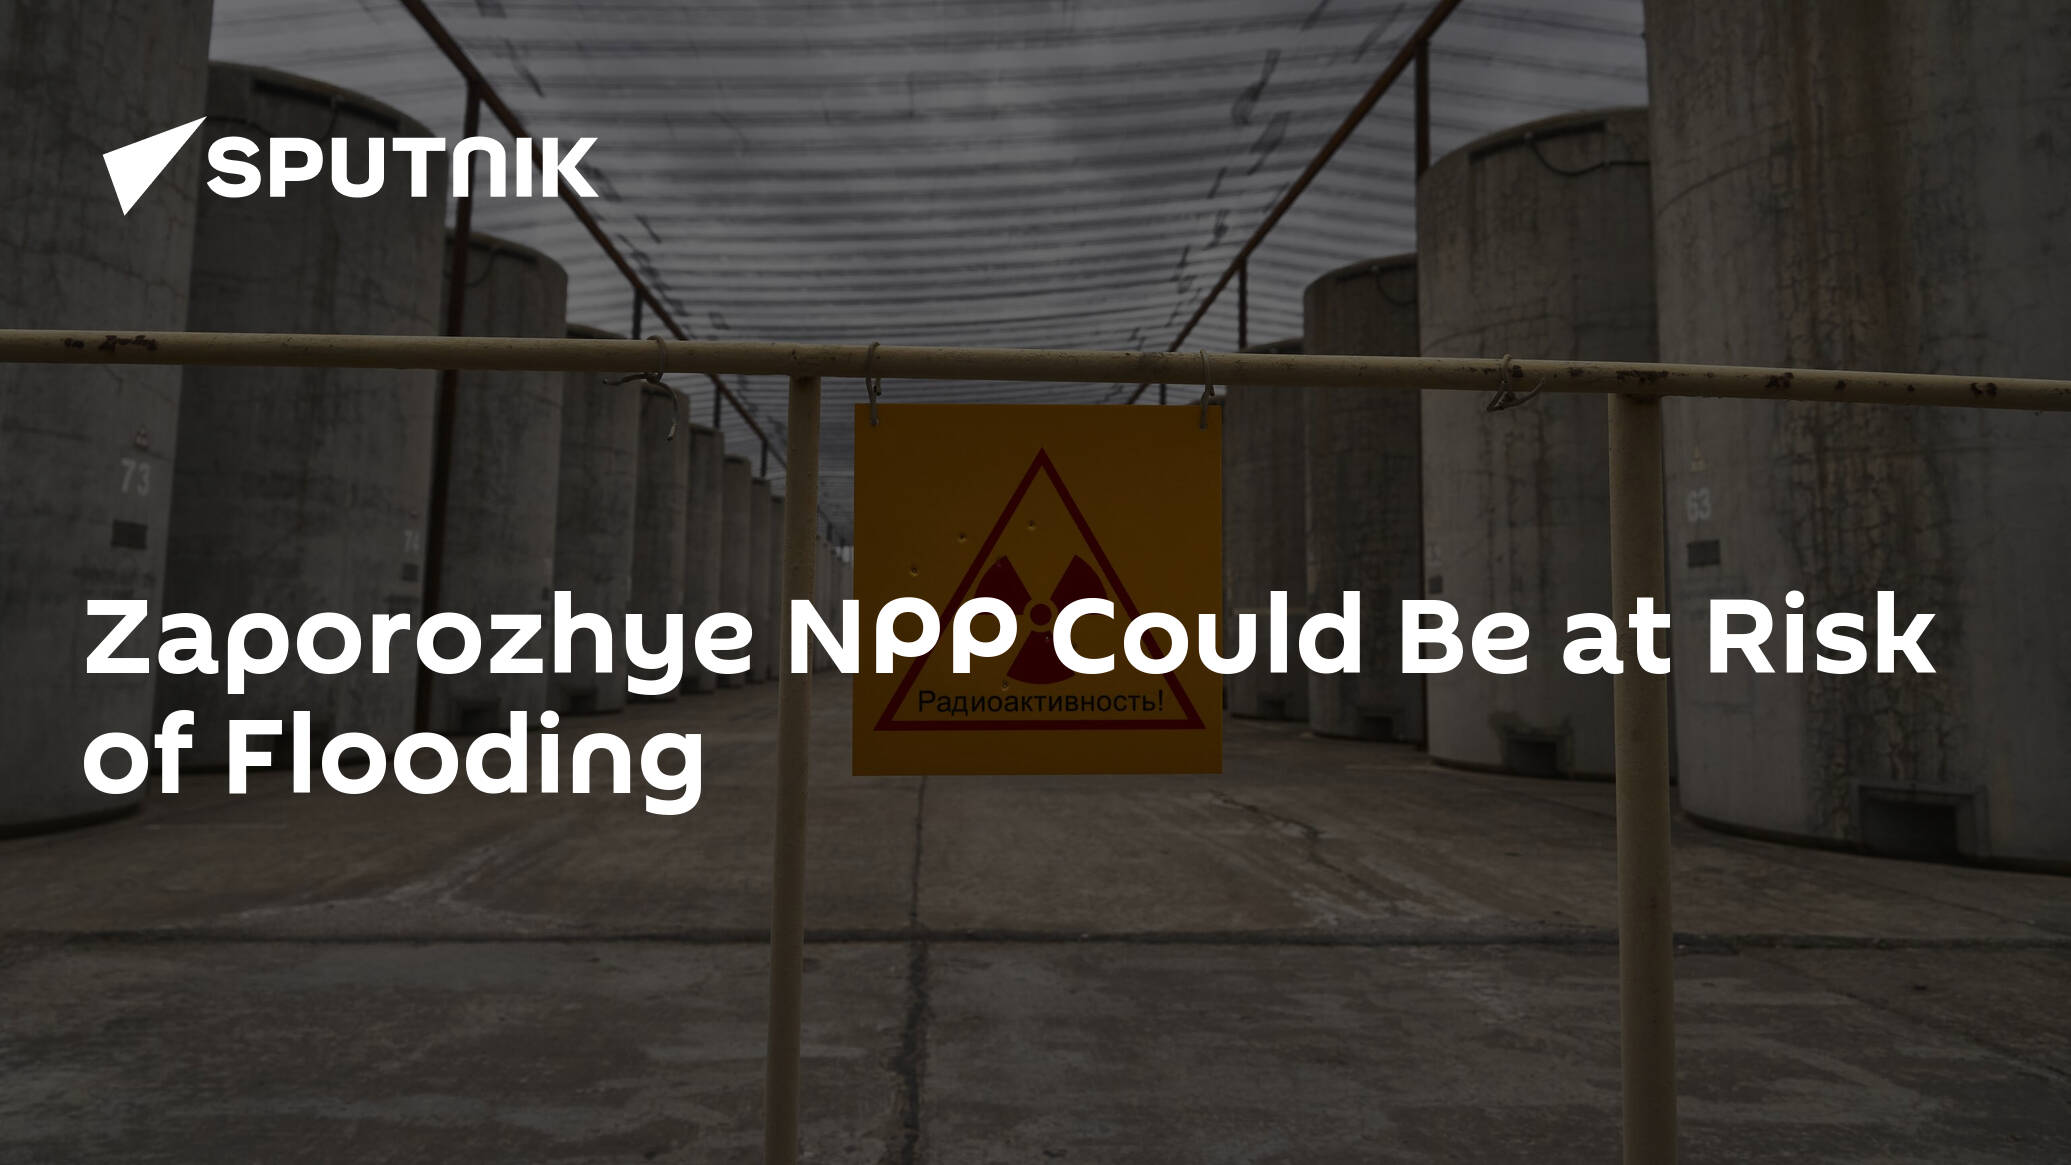 Zaporozhye NPP Could Be at Risk of Flooding